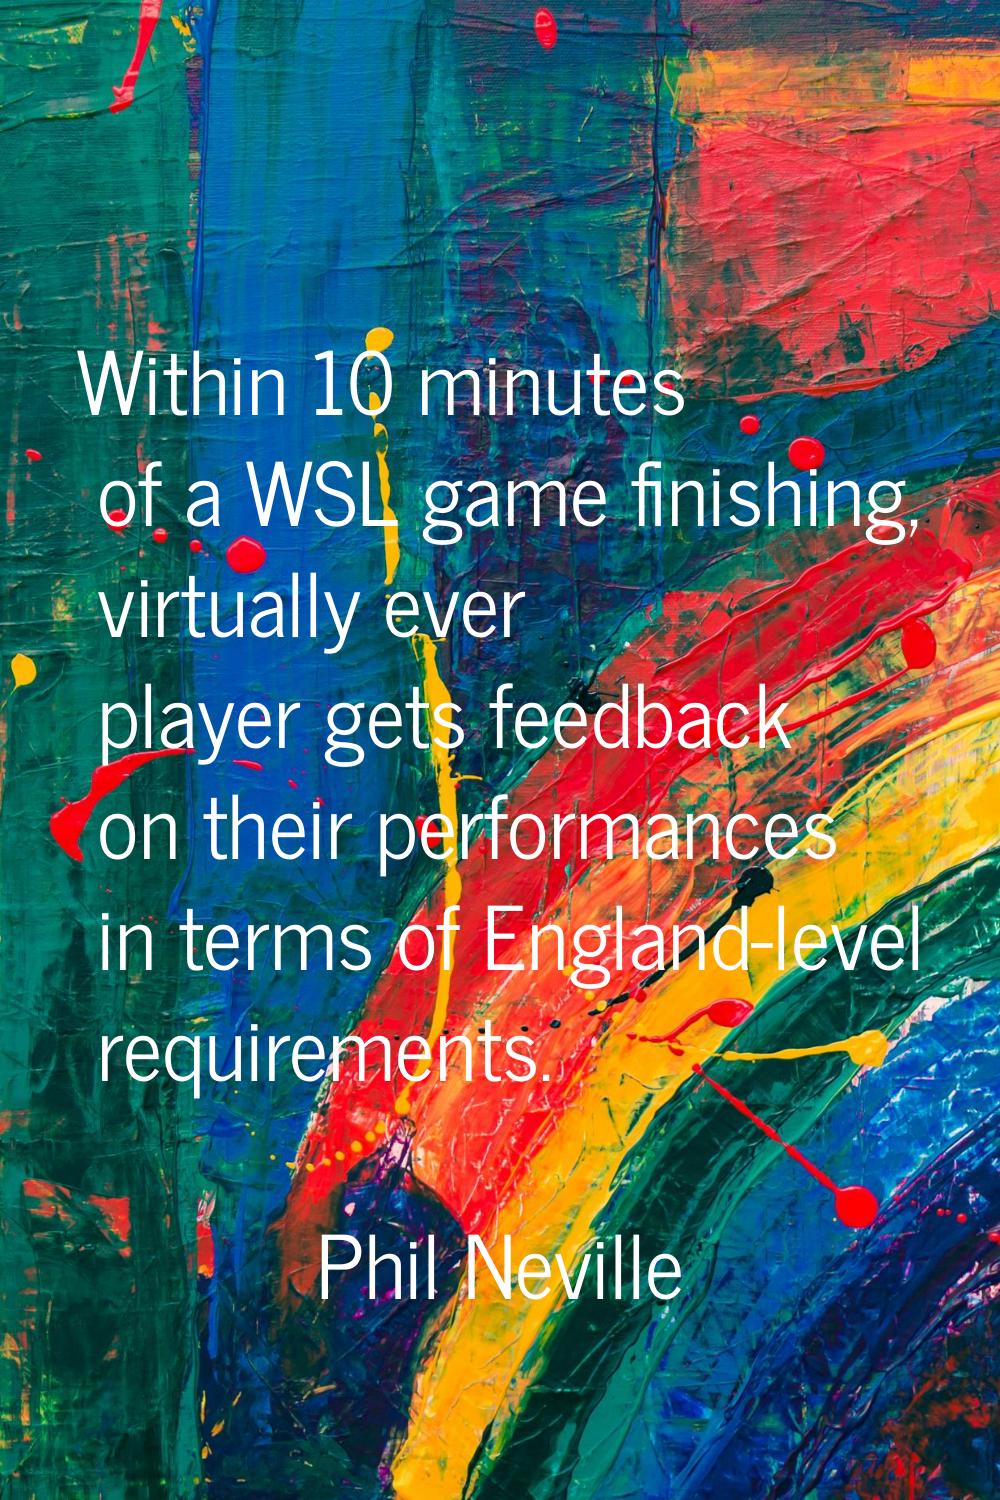 Within 10 minutes of a WSL game finishing, virtually ever player gets feedback on their performance